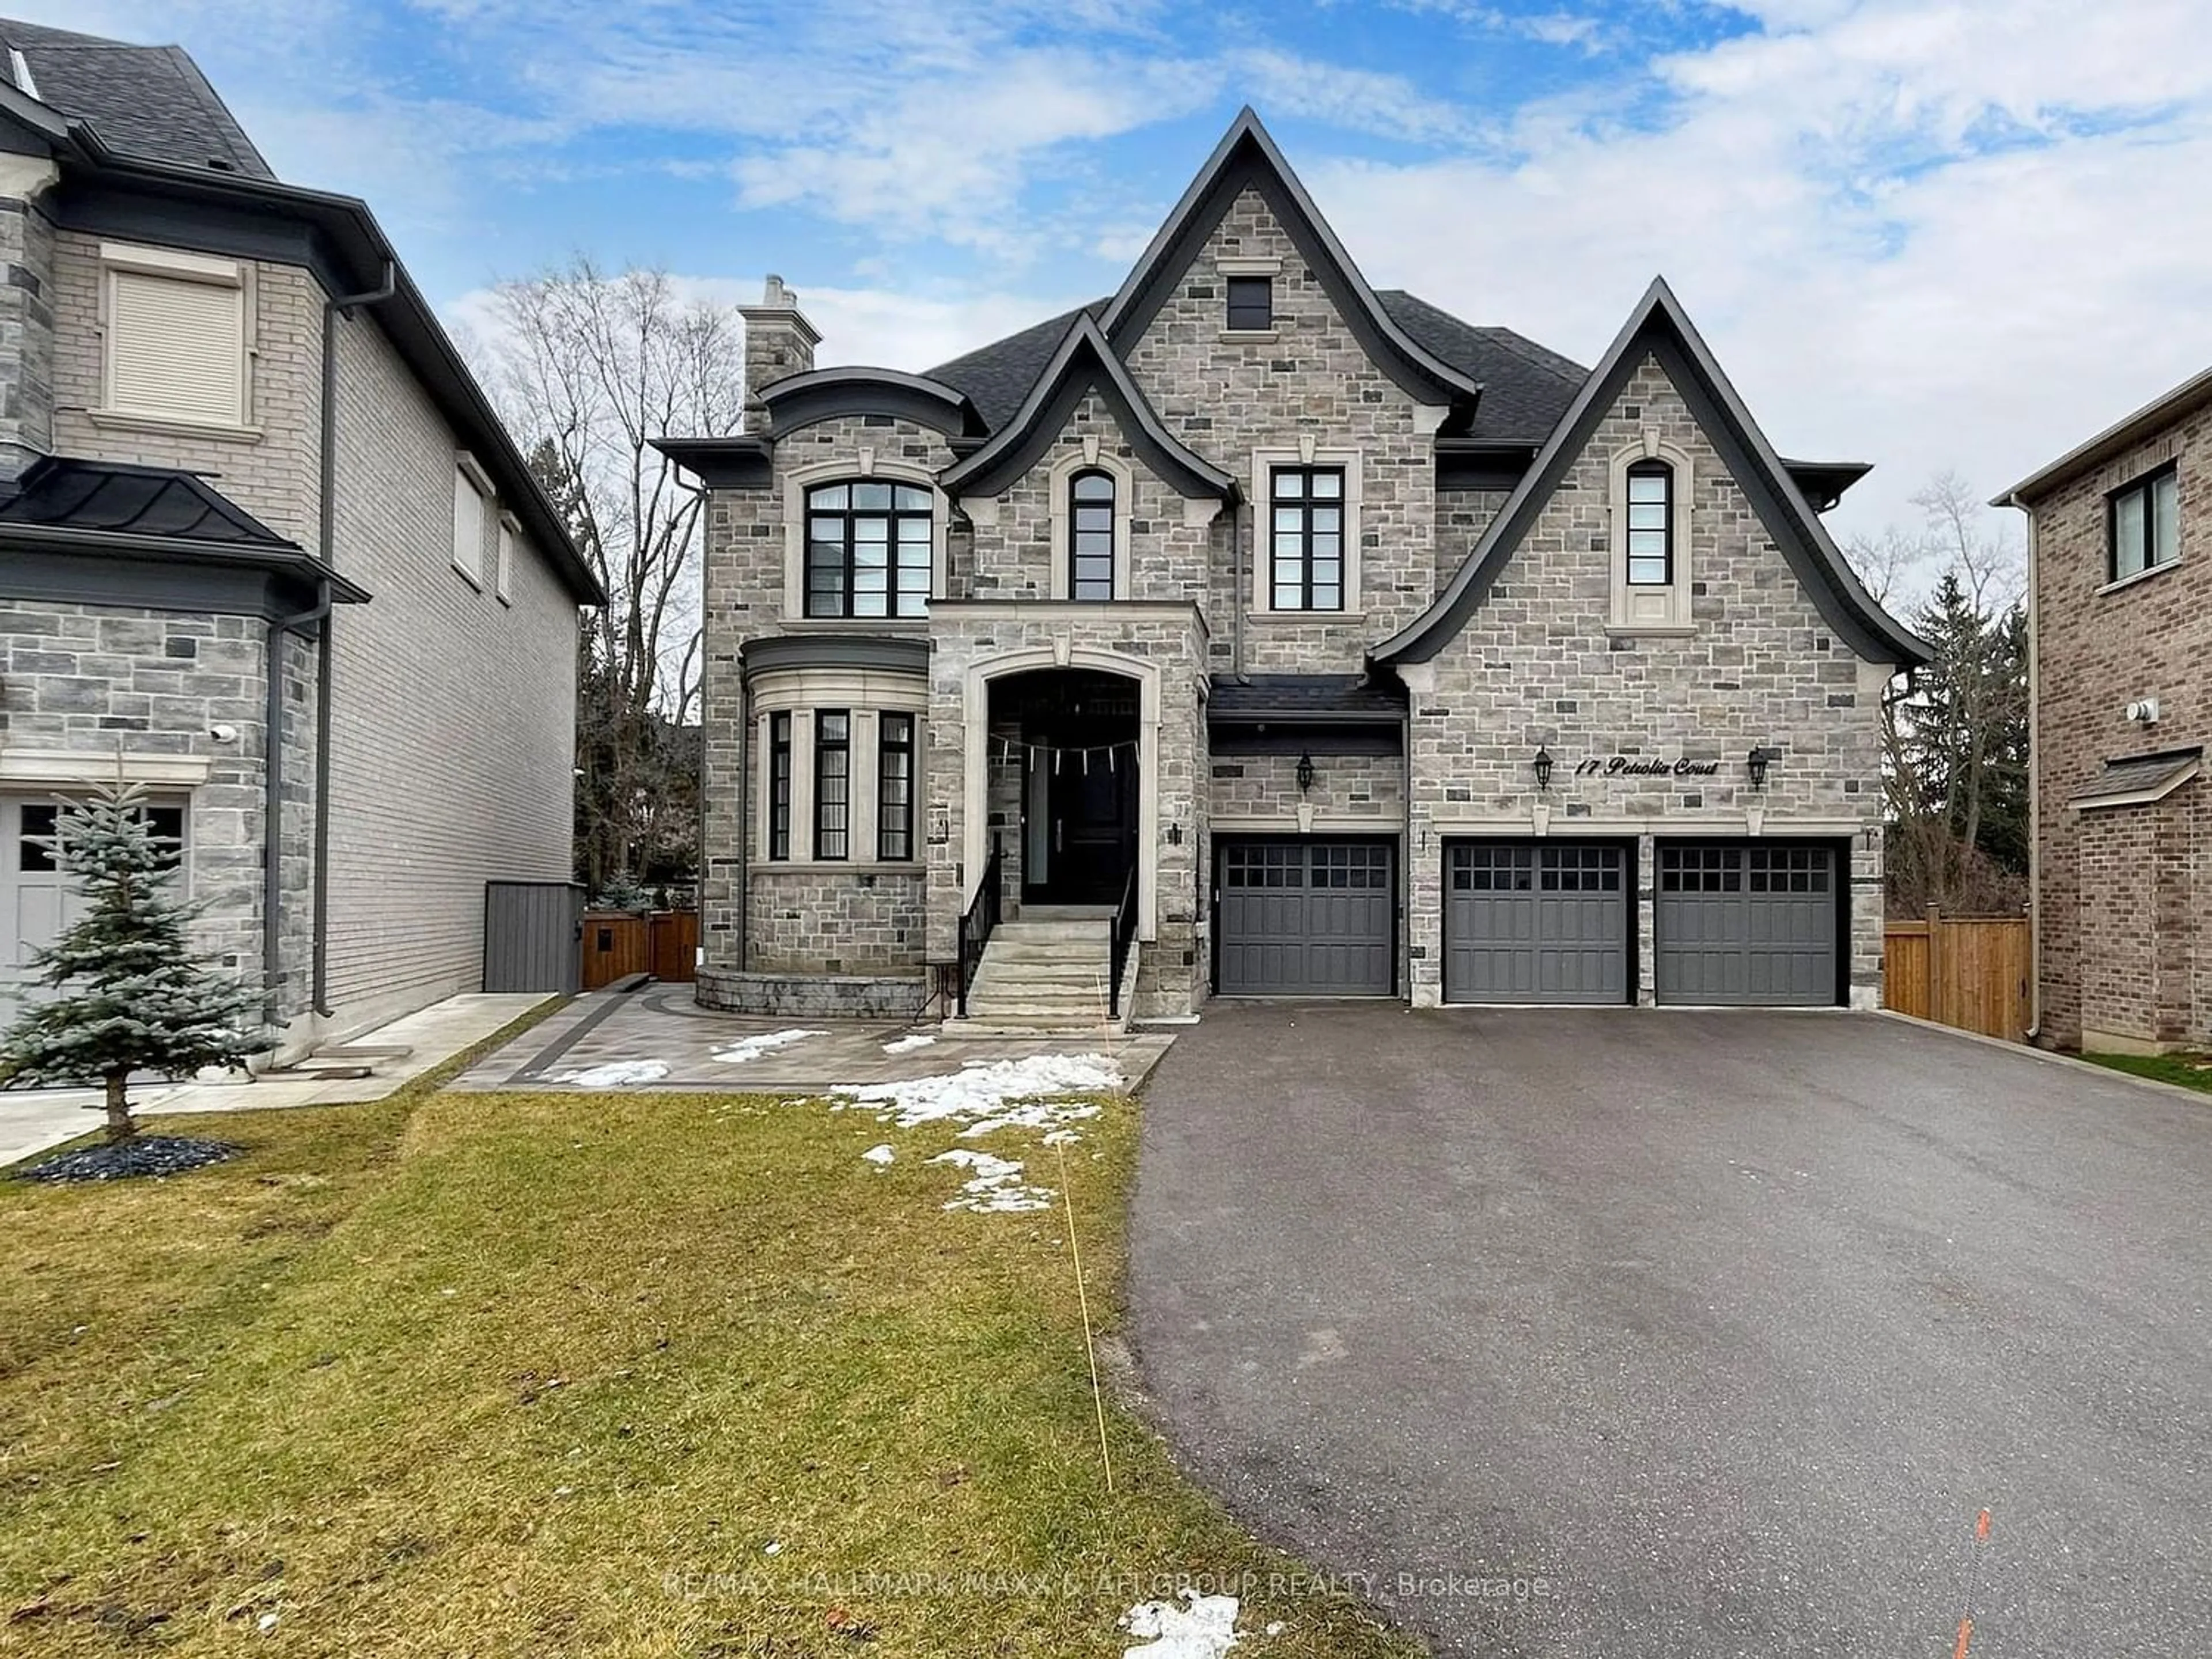 Home with brick exterior material for 17 Petrolia Crt, Richmond Hill Ontario L4C 0C2